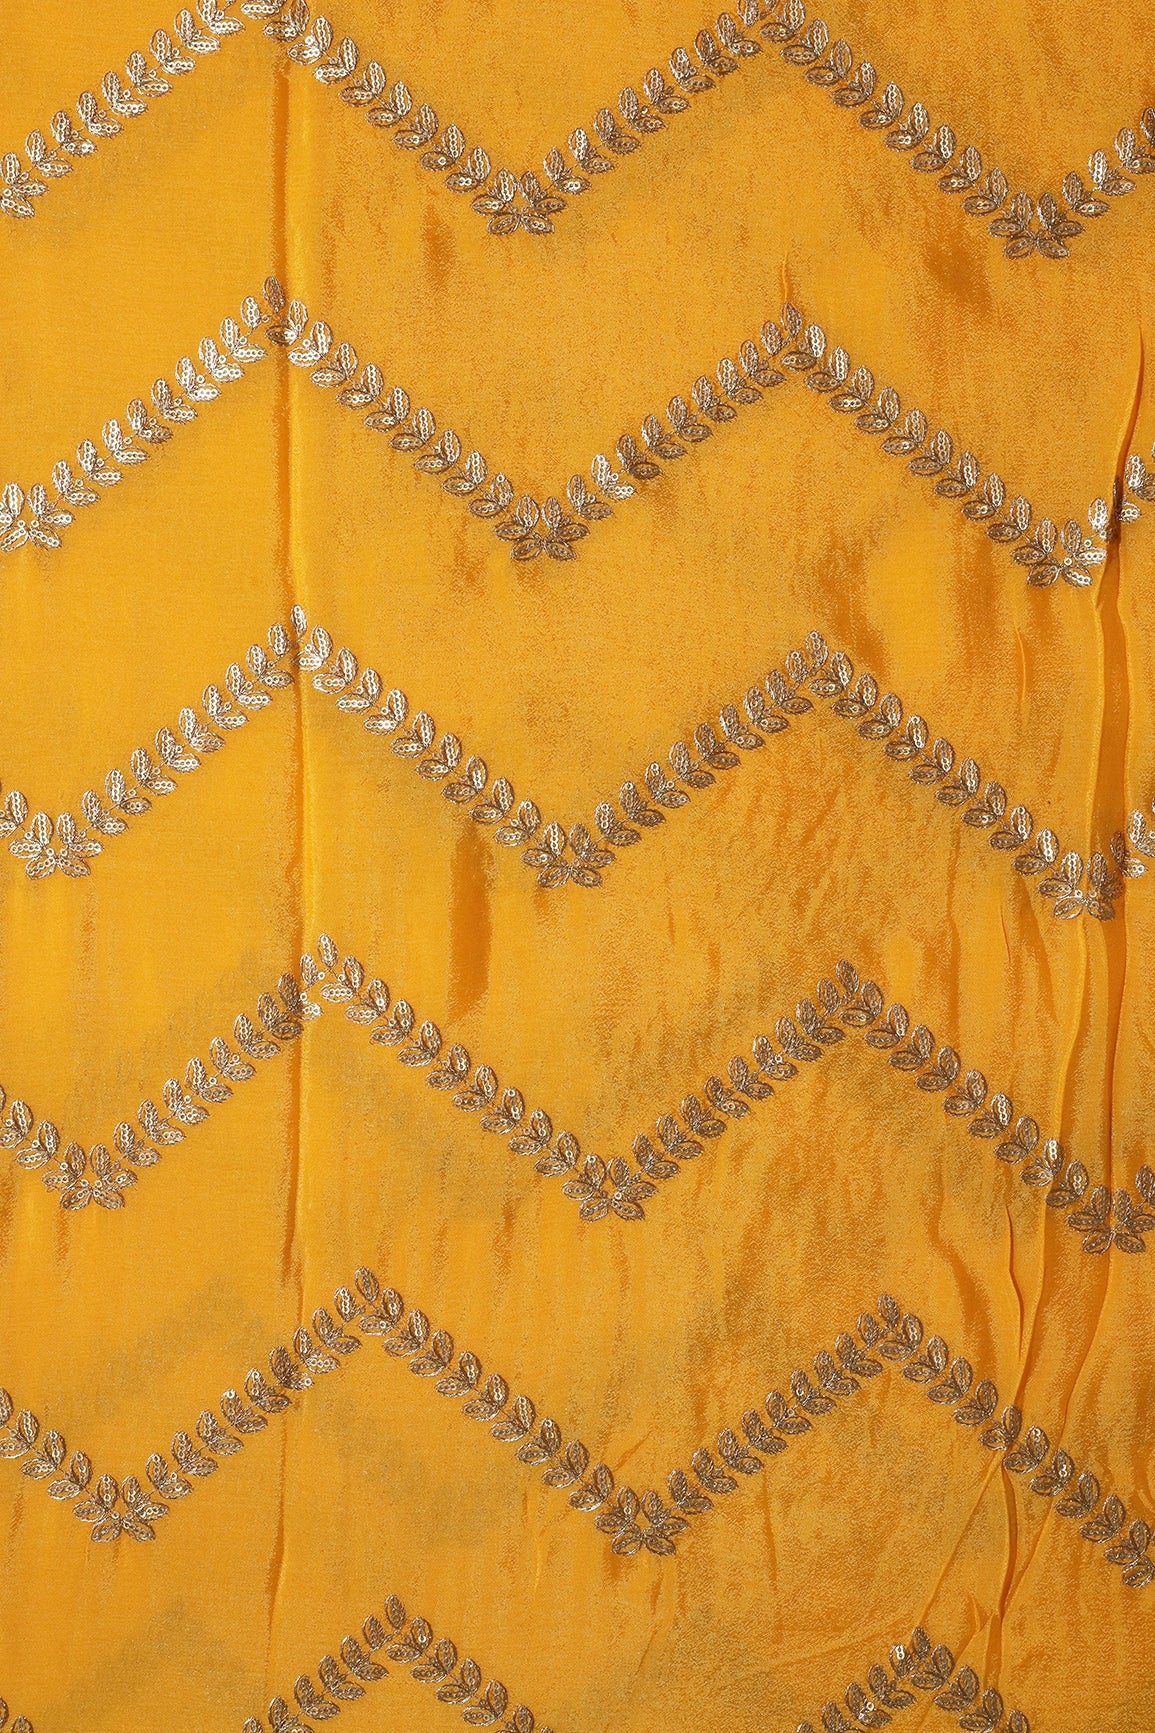 Gold Zari With Gold Sequins Chevron Embroidery Work On Yellow Chinnon Chiffon Fabric